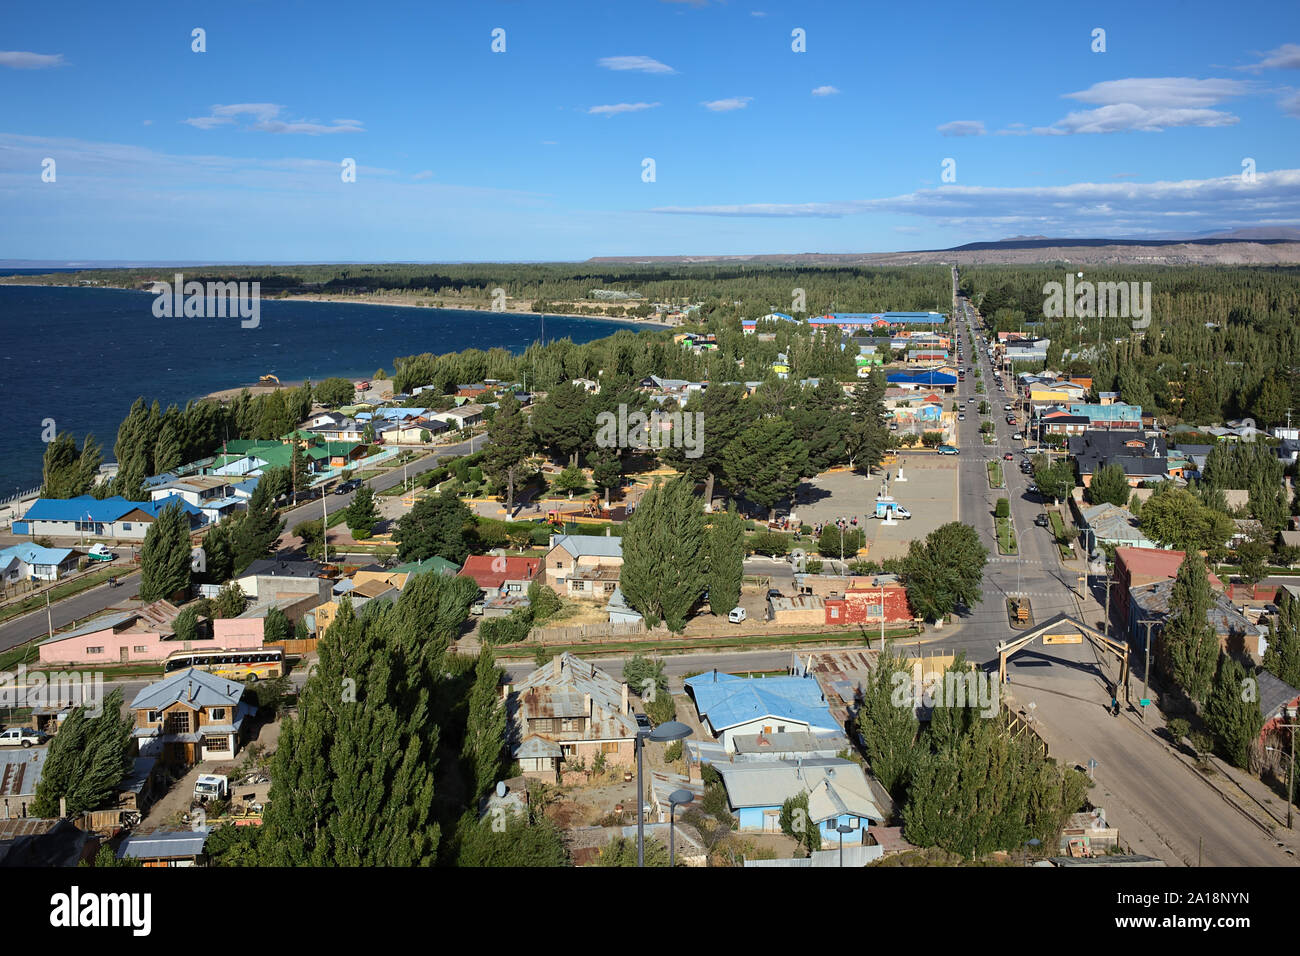 CHILE CHICO, CHILE - FEBRUARY 23, 2016: View from Plaza del Viento lookout of the town Chile Chico on the shore of Lago General Carrera lake Stock Photo